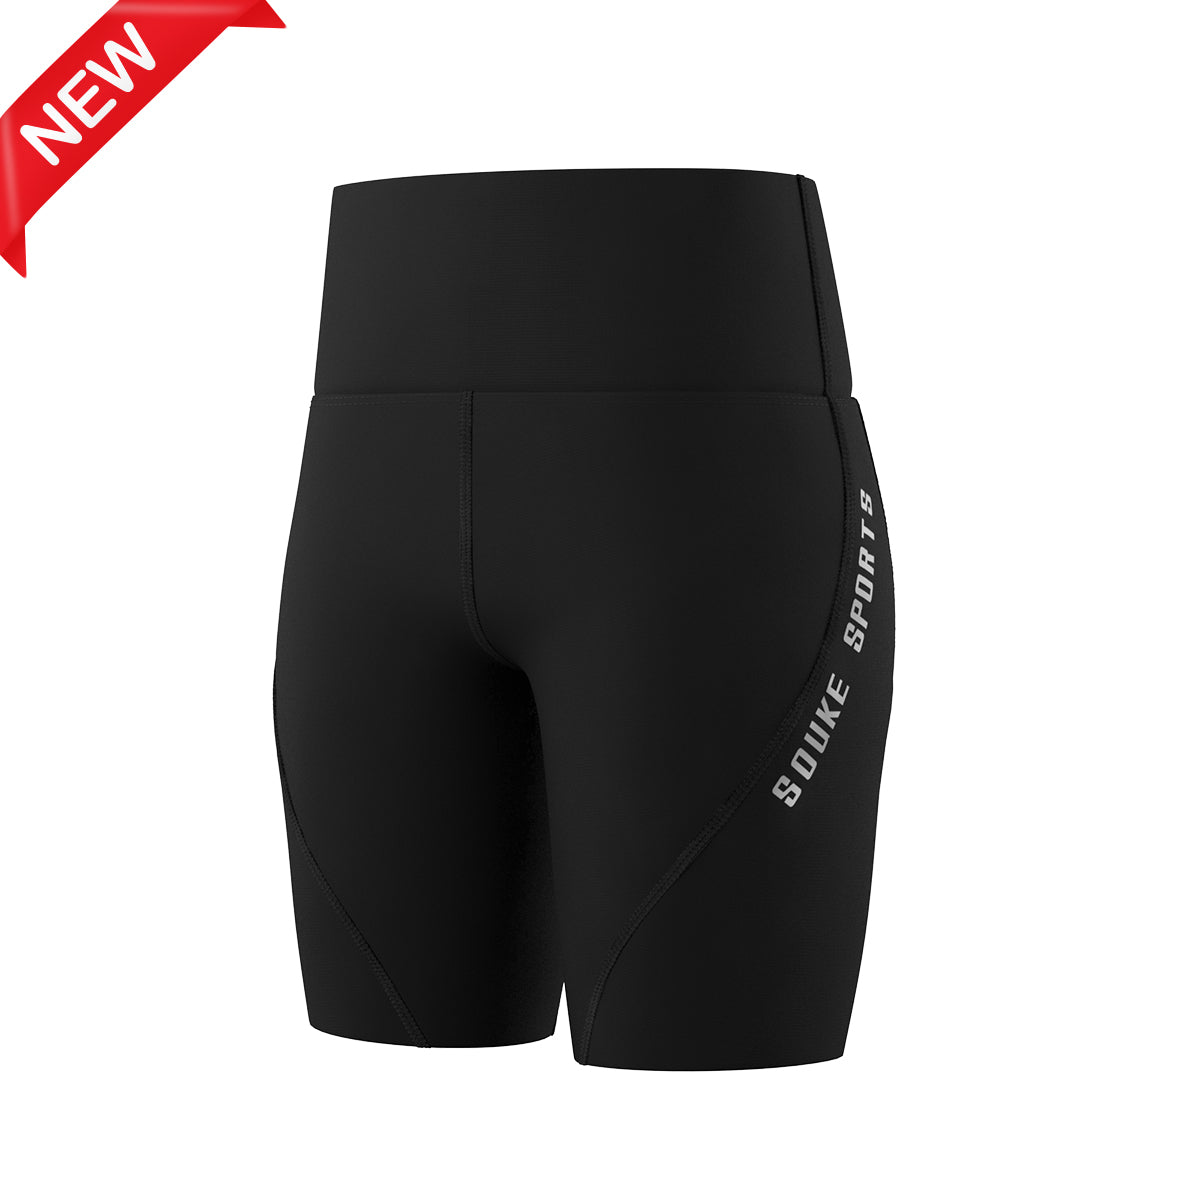 Souke Sports New Women's Classic Cycling Padded/Non padded Shorts PS0723--Black